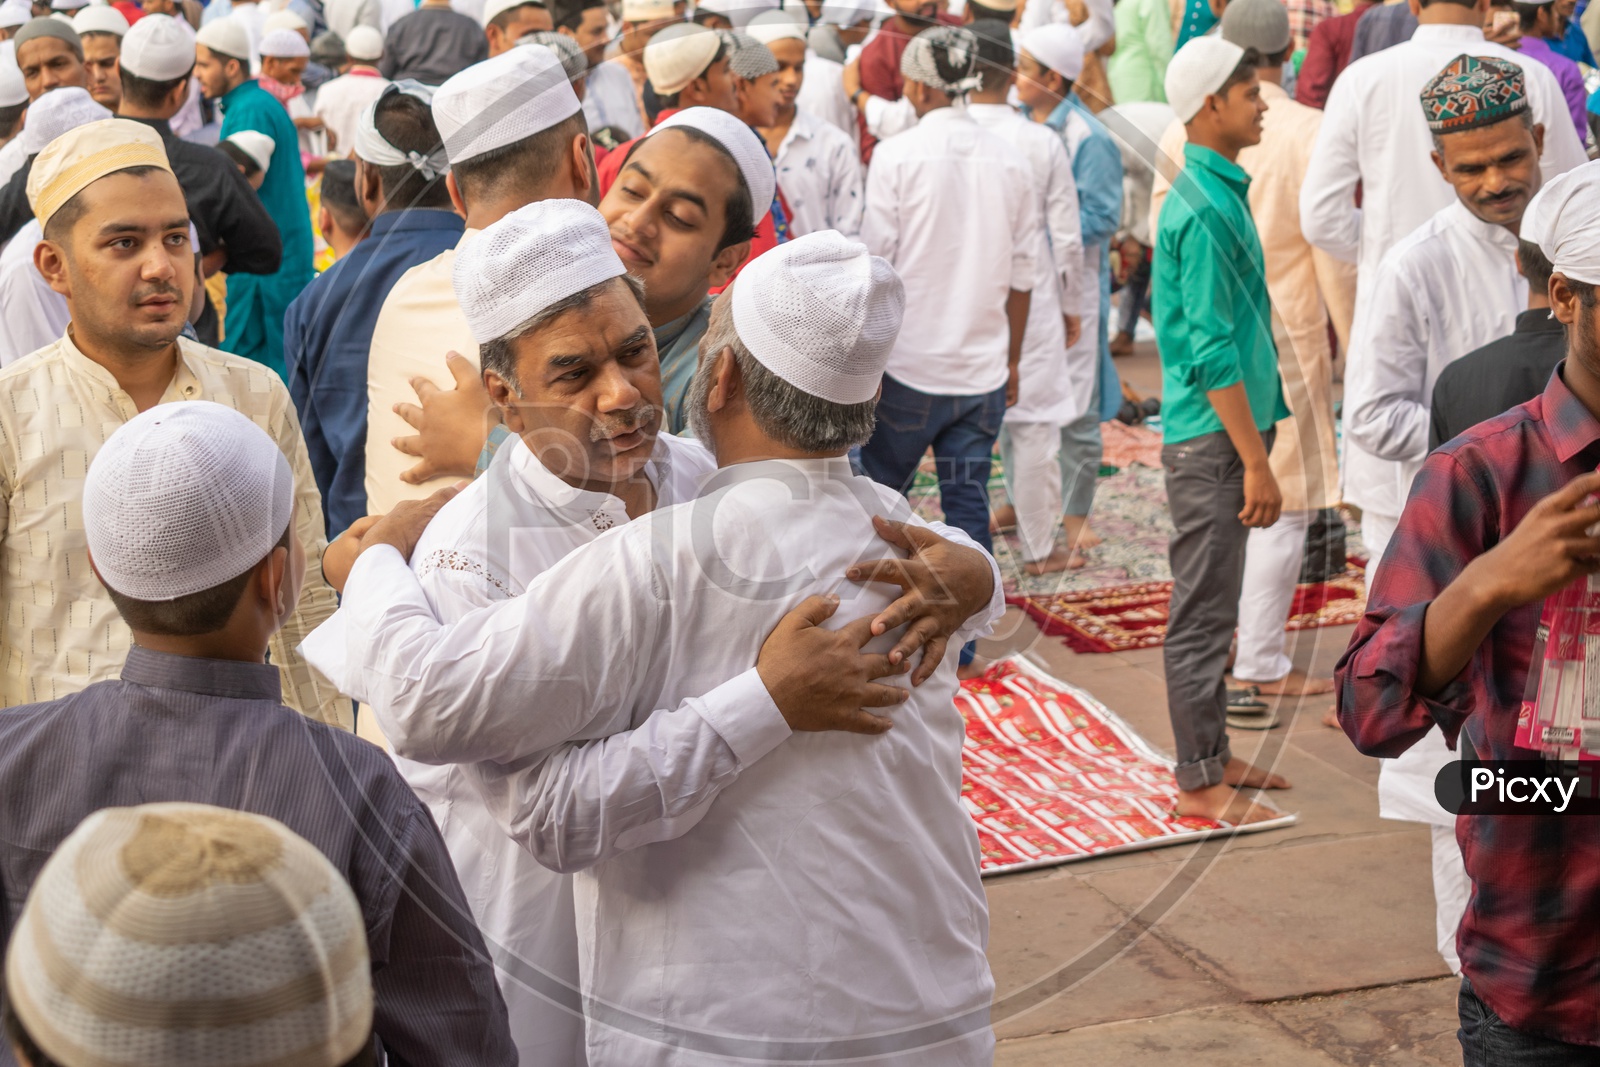 Men hugging each other after the Namaz on the day of Eid-ul-Fitr (End of the holy month of Ramadan) at Jama Masjid, Delhi